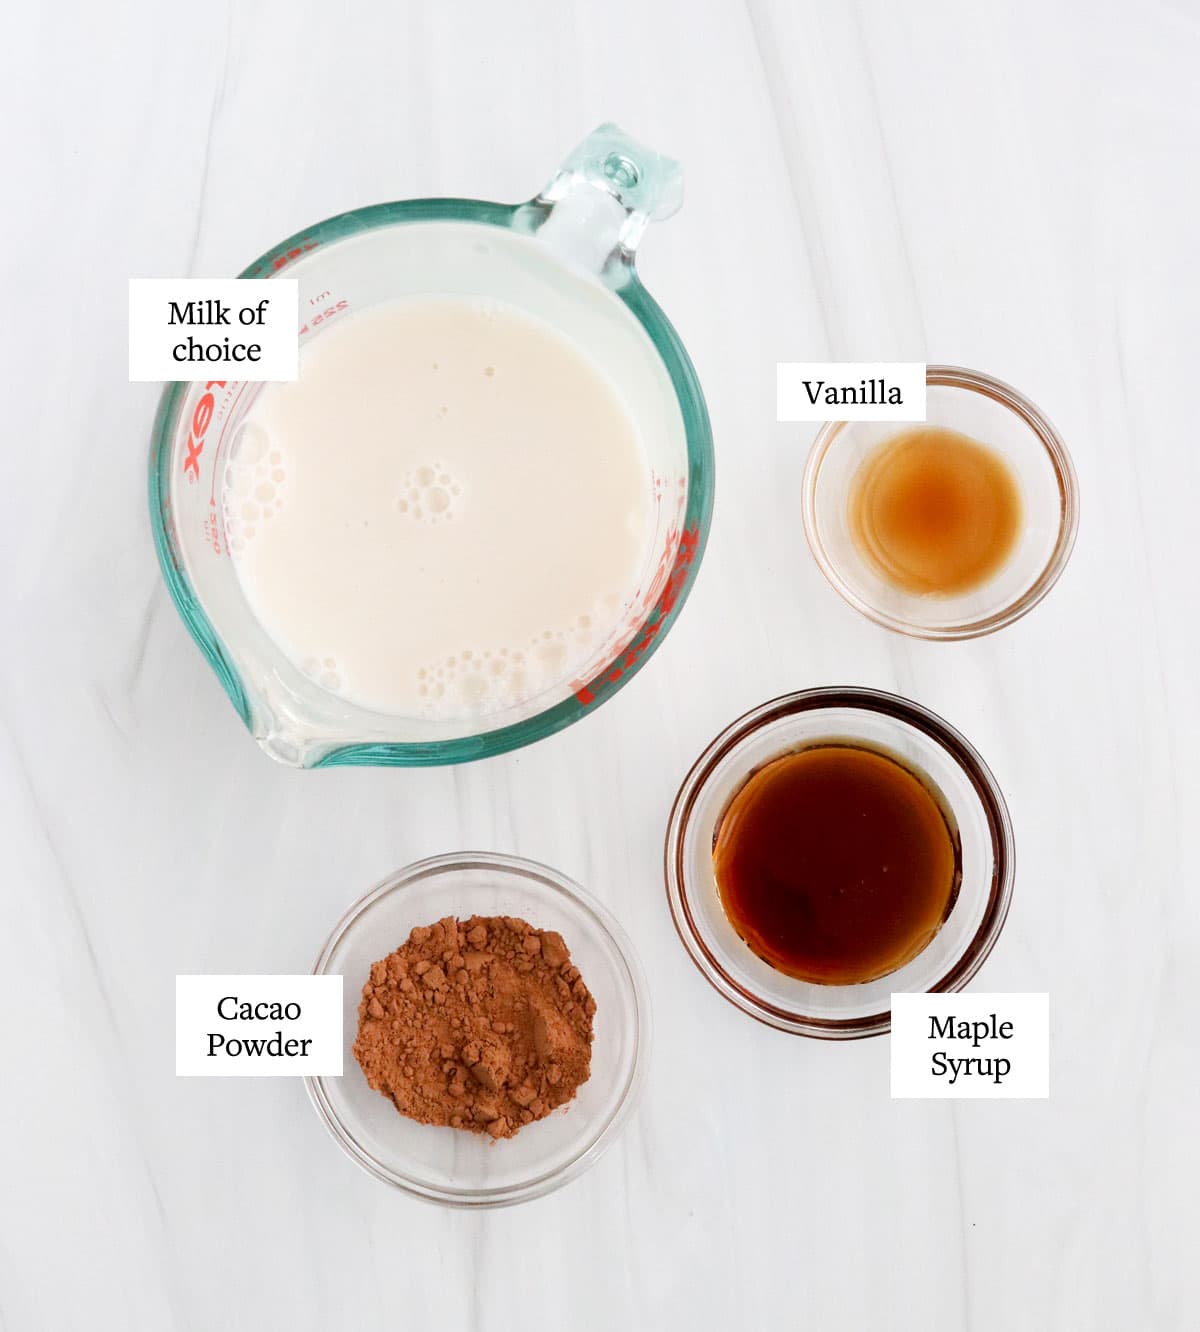 healthy hot chocolate ingredients in glass bowls on white surface.